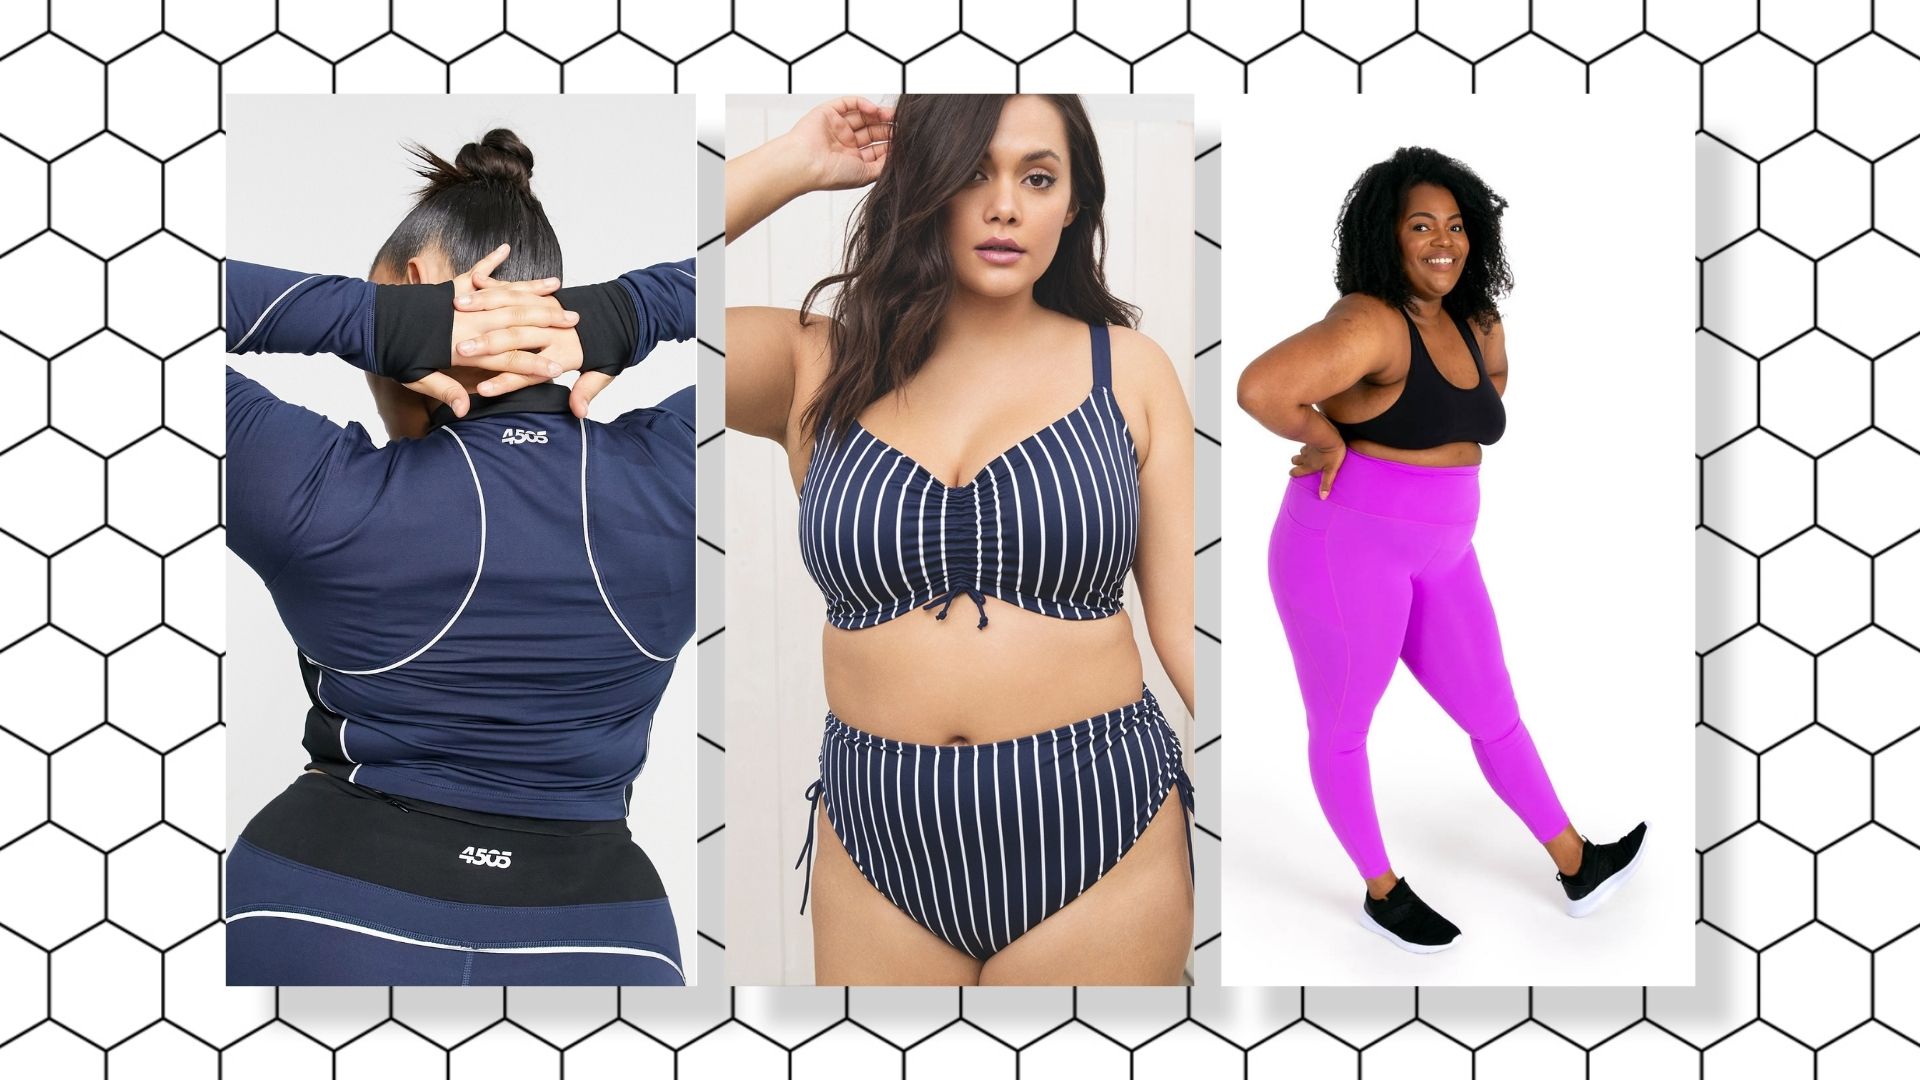 Plus-Size Fitness Fans Call for More-Inclusive Sports Gear